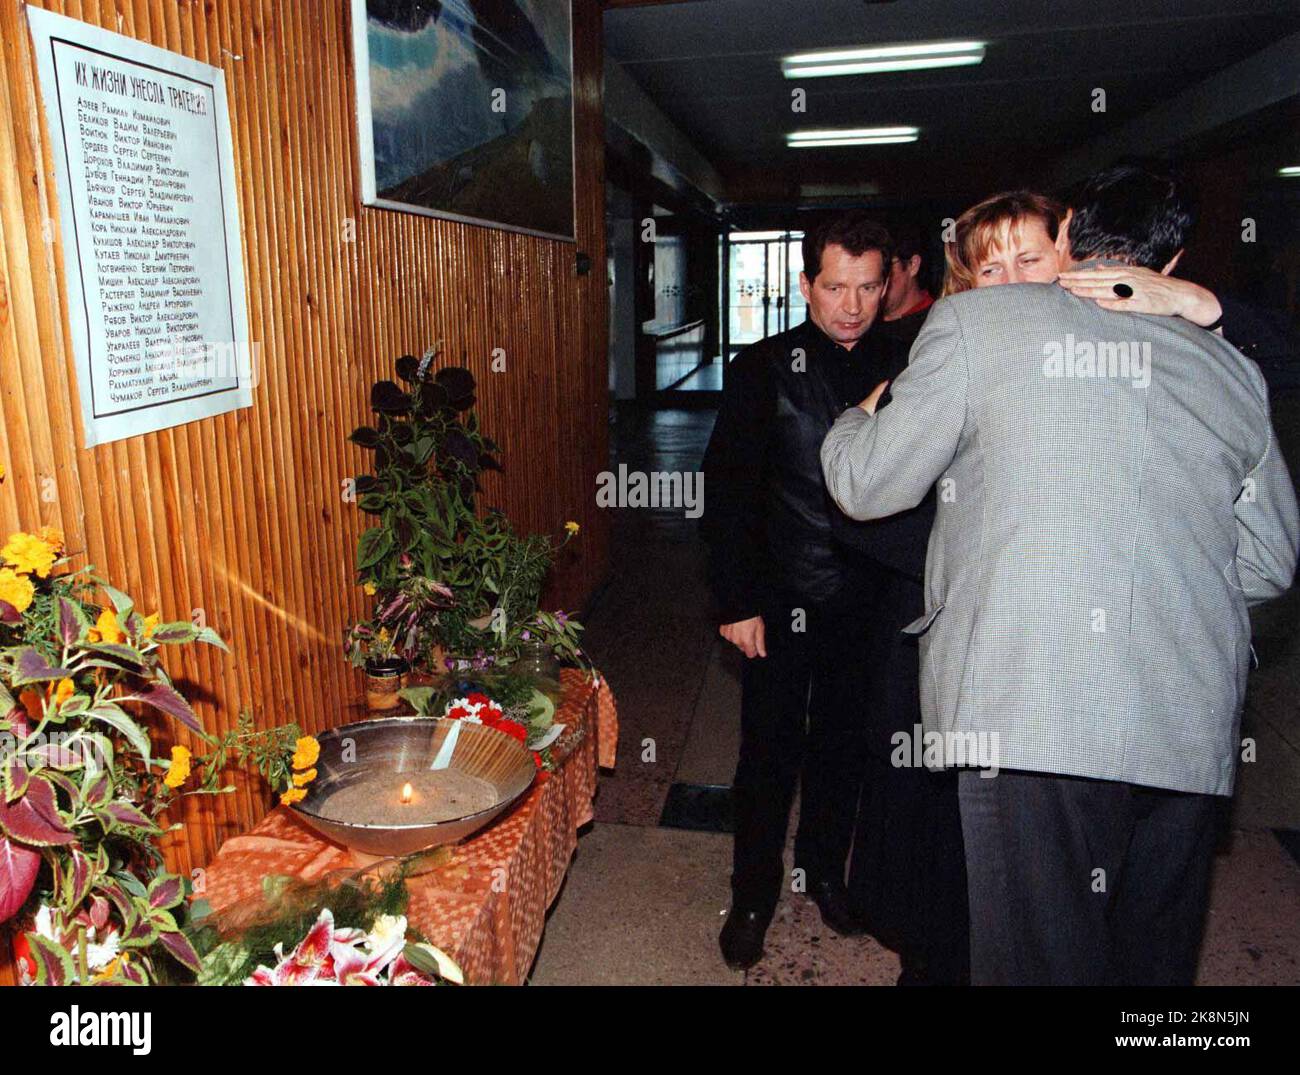 Barentsburg 19970920: Mining accident Barentsburg. The Norwegian government's flower greeting was placed on the memorial board of the 23 dead in the cultural center by trade union leader Vasilij Saukh (back to V). Justice Minister Gerd-Liv Valla conveys moved condolences to the Vice President of the Russian Coal Workers' Union, Ivan Mokhnachuk. Photo: Rune Petter Ness / NTB / NTB Stock Photo